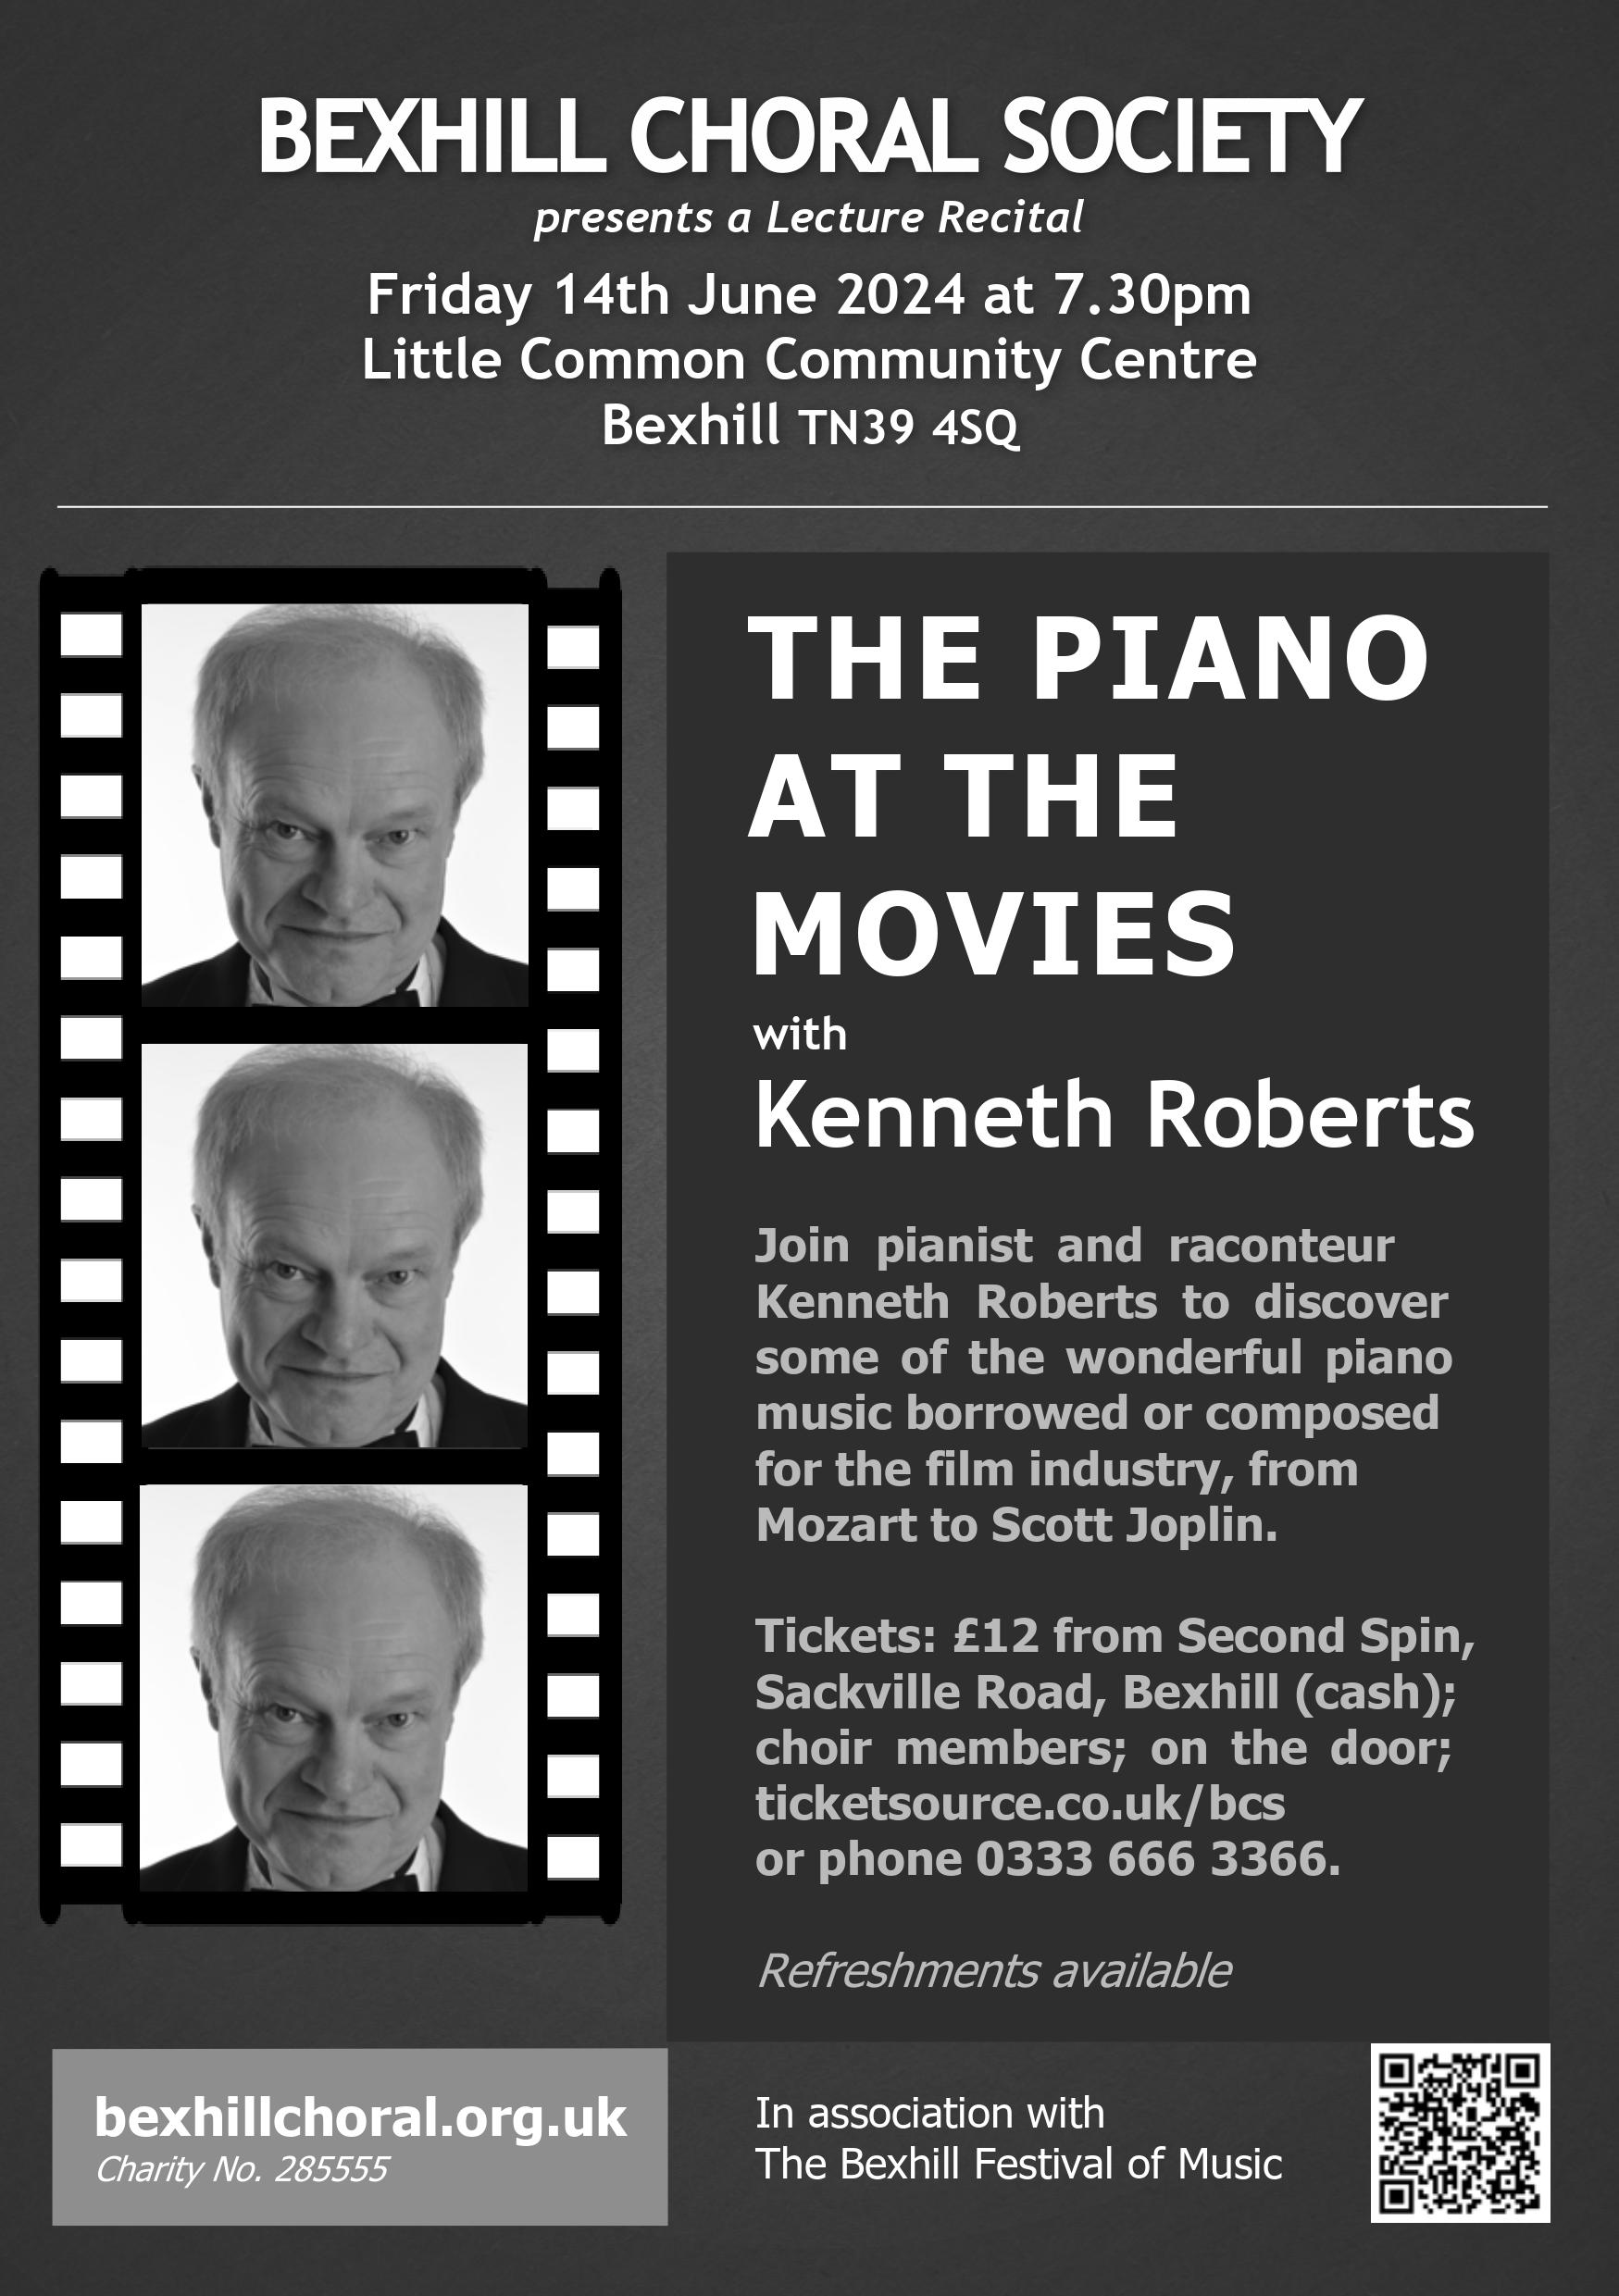 The Piano at the Movies - Lecture Recital by Kenneth Roberts 